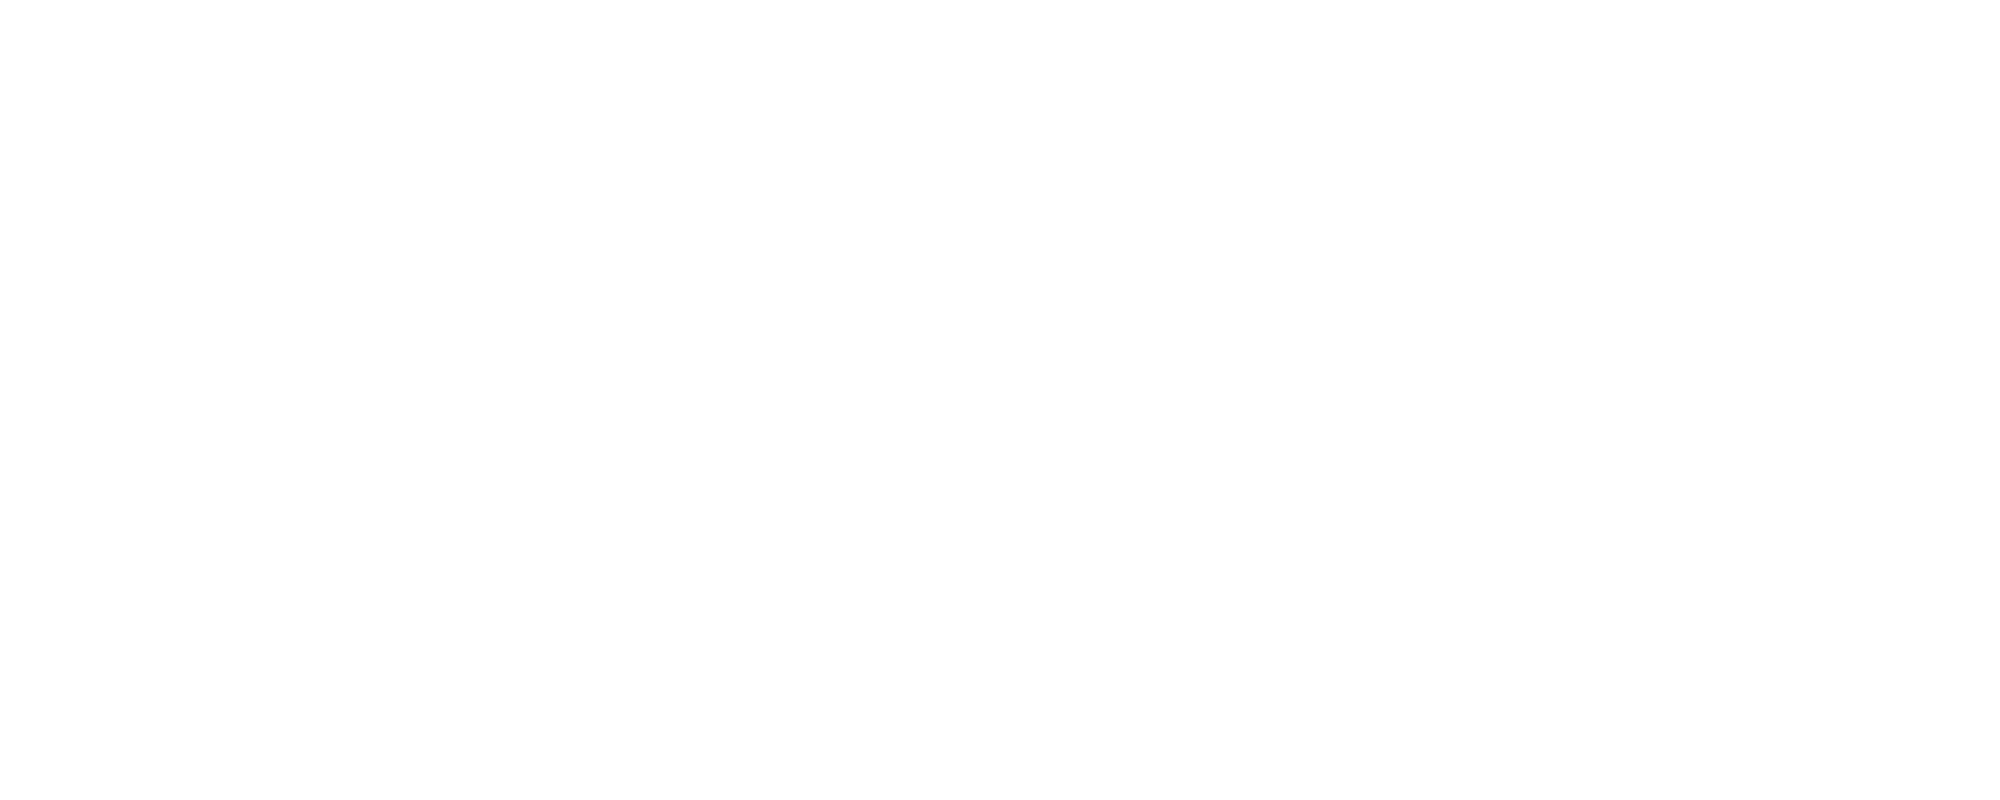 OVATION TV’S OPEN LETTER TO CONGRESS